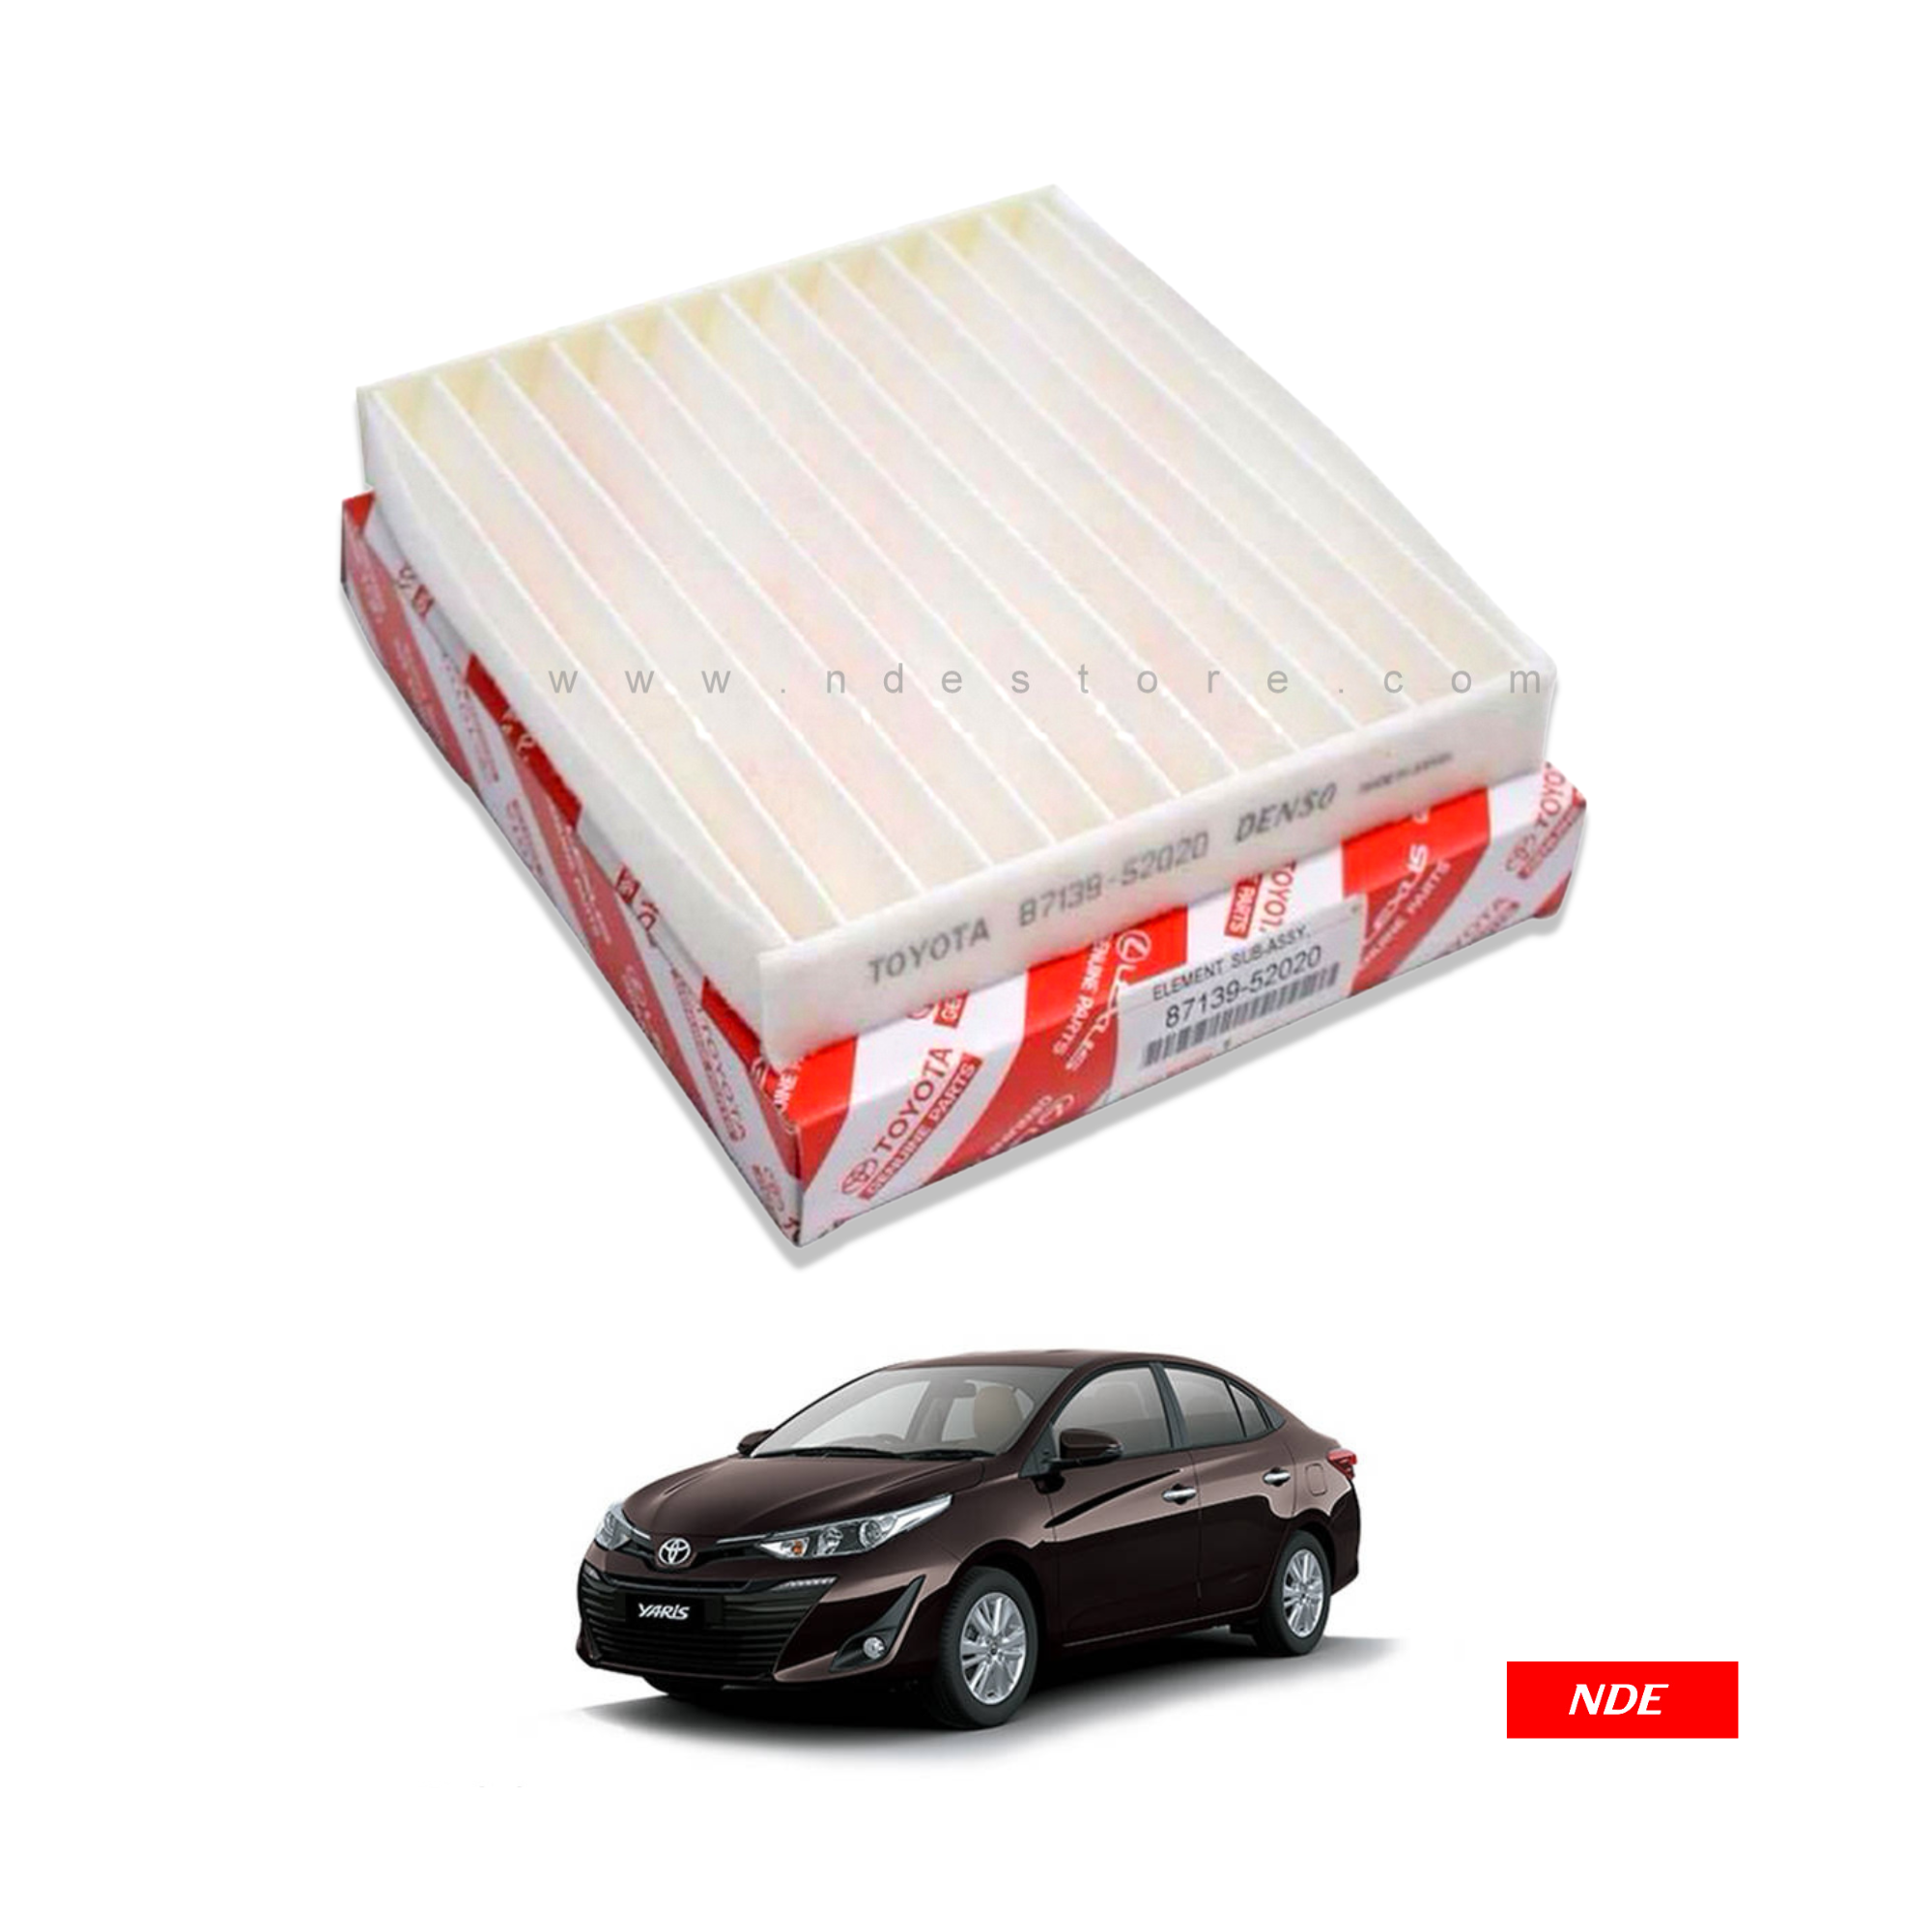 CABIN AIR FILTER / AC FILTER GENUINE FOR TOYOTA YARIS (TOYOTA GENUINE PART)